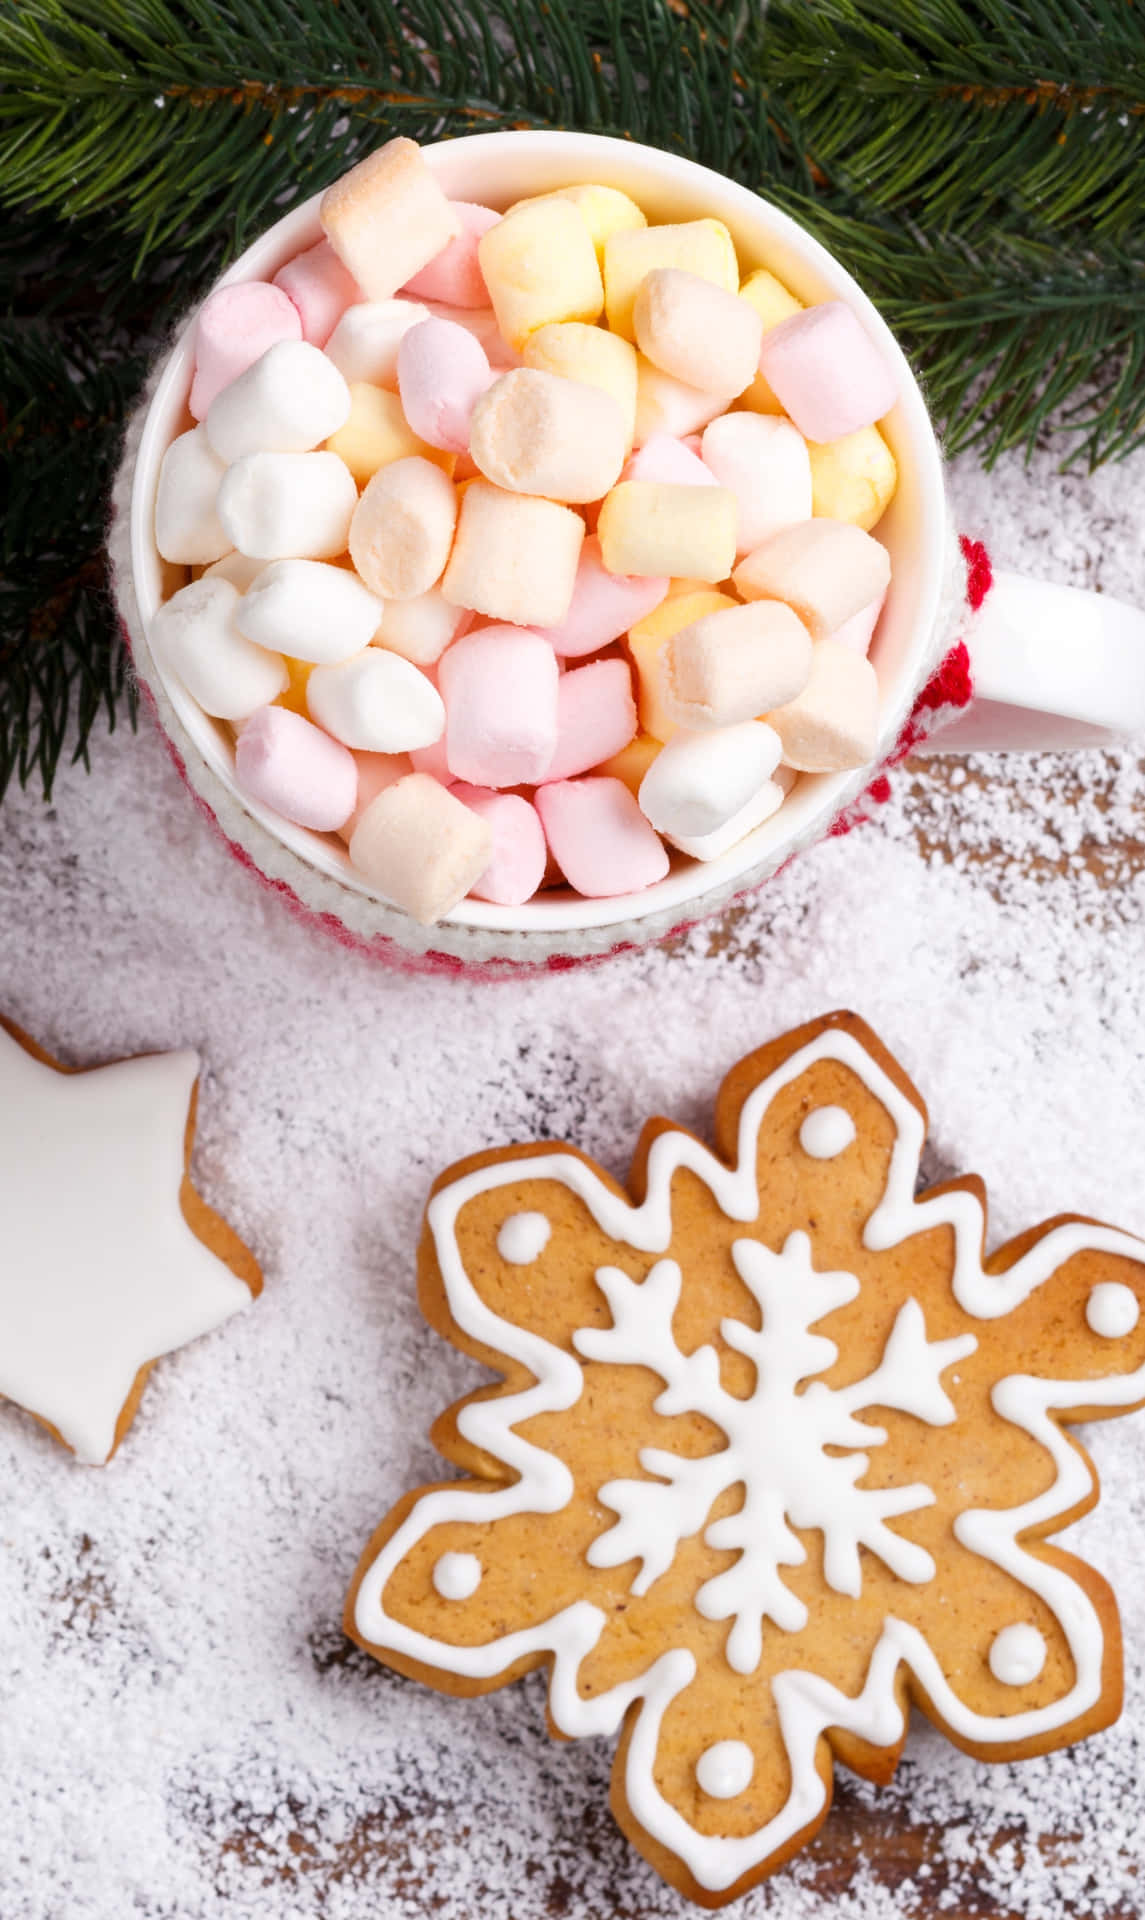 A Cup Of Hot Chocolate With Marshmallows And Snowflakes Wallpaper